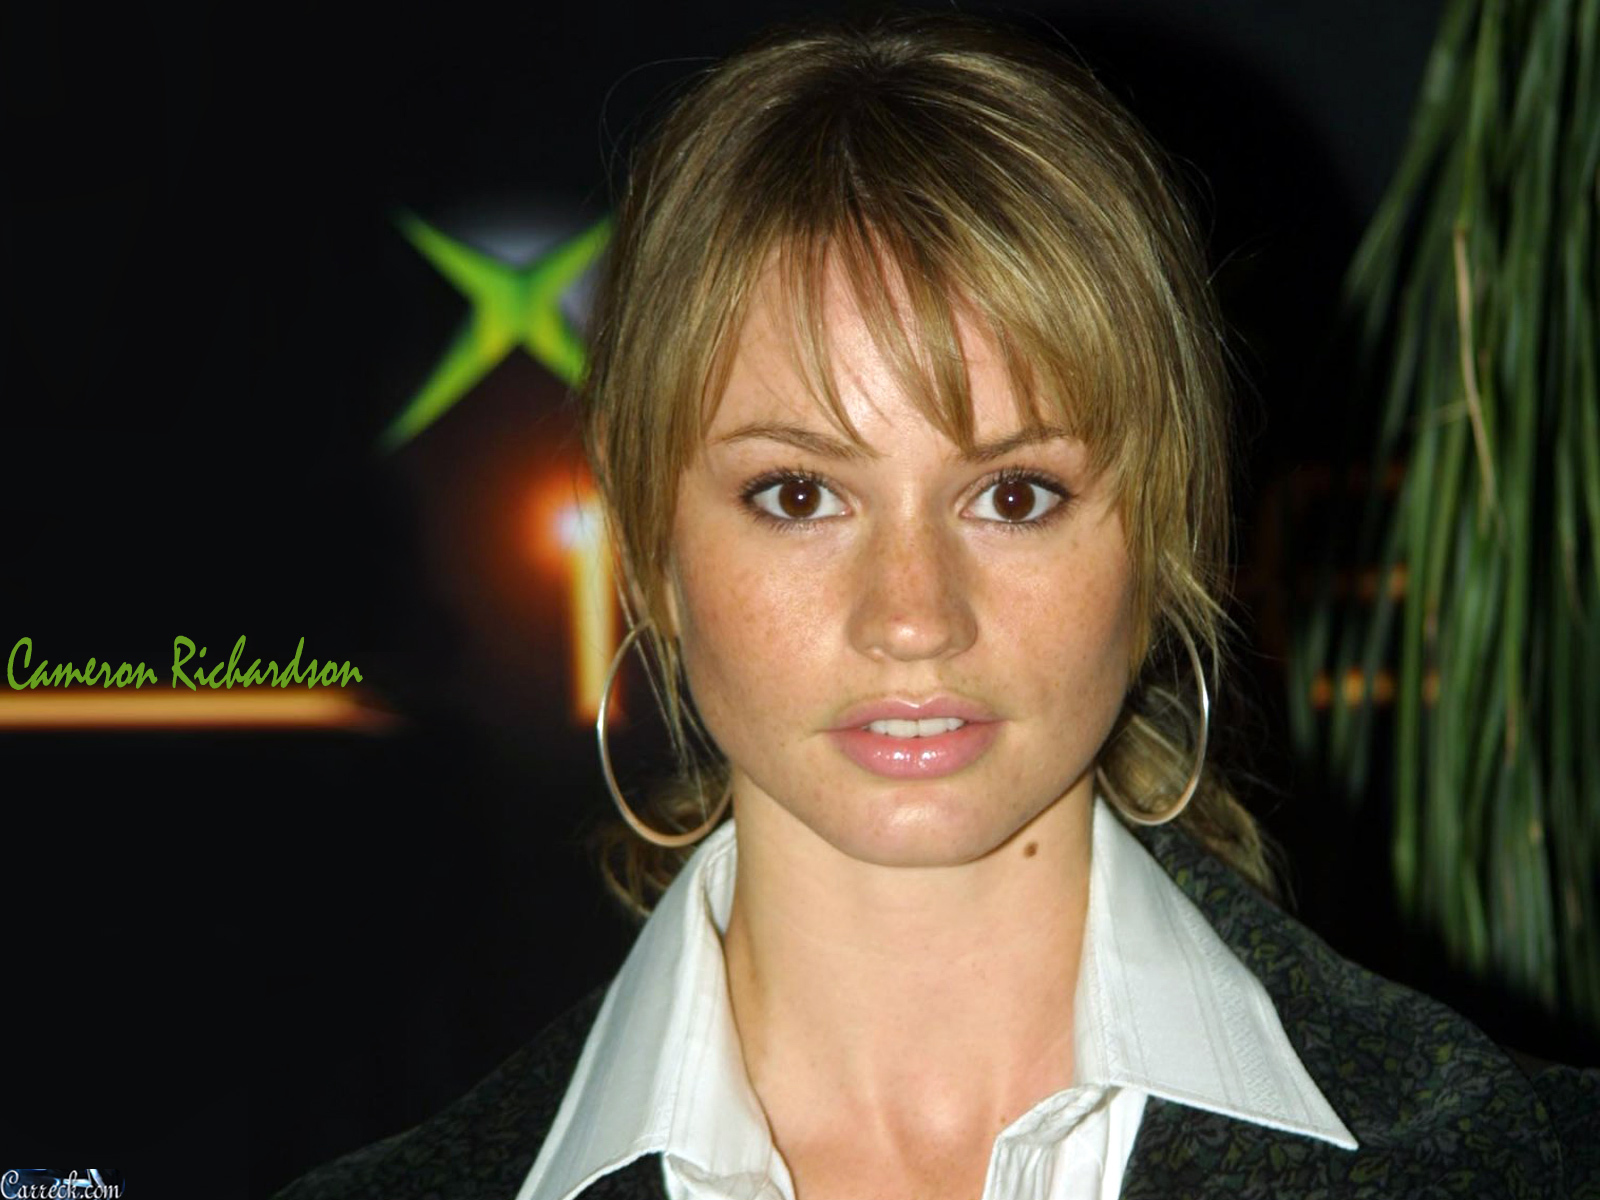 best-pictures-of-cameron-richardson